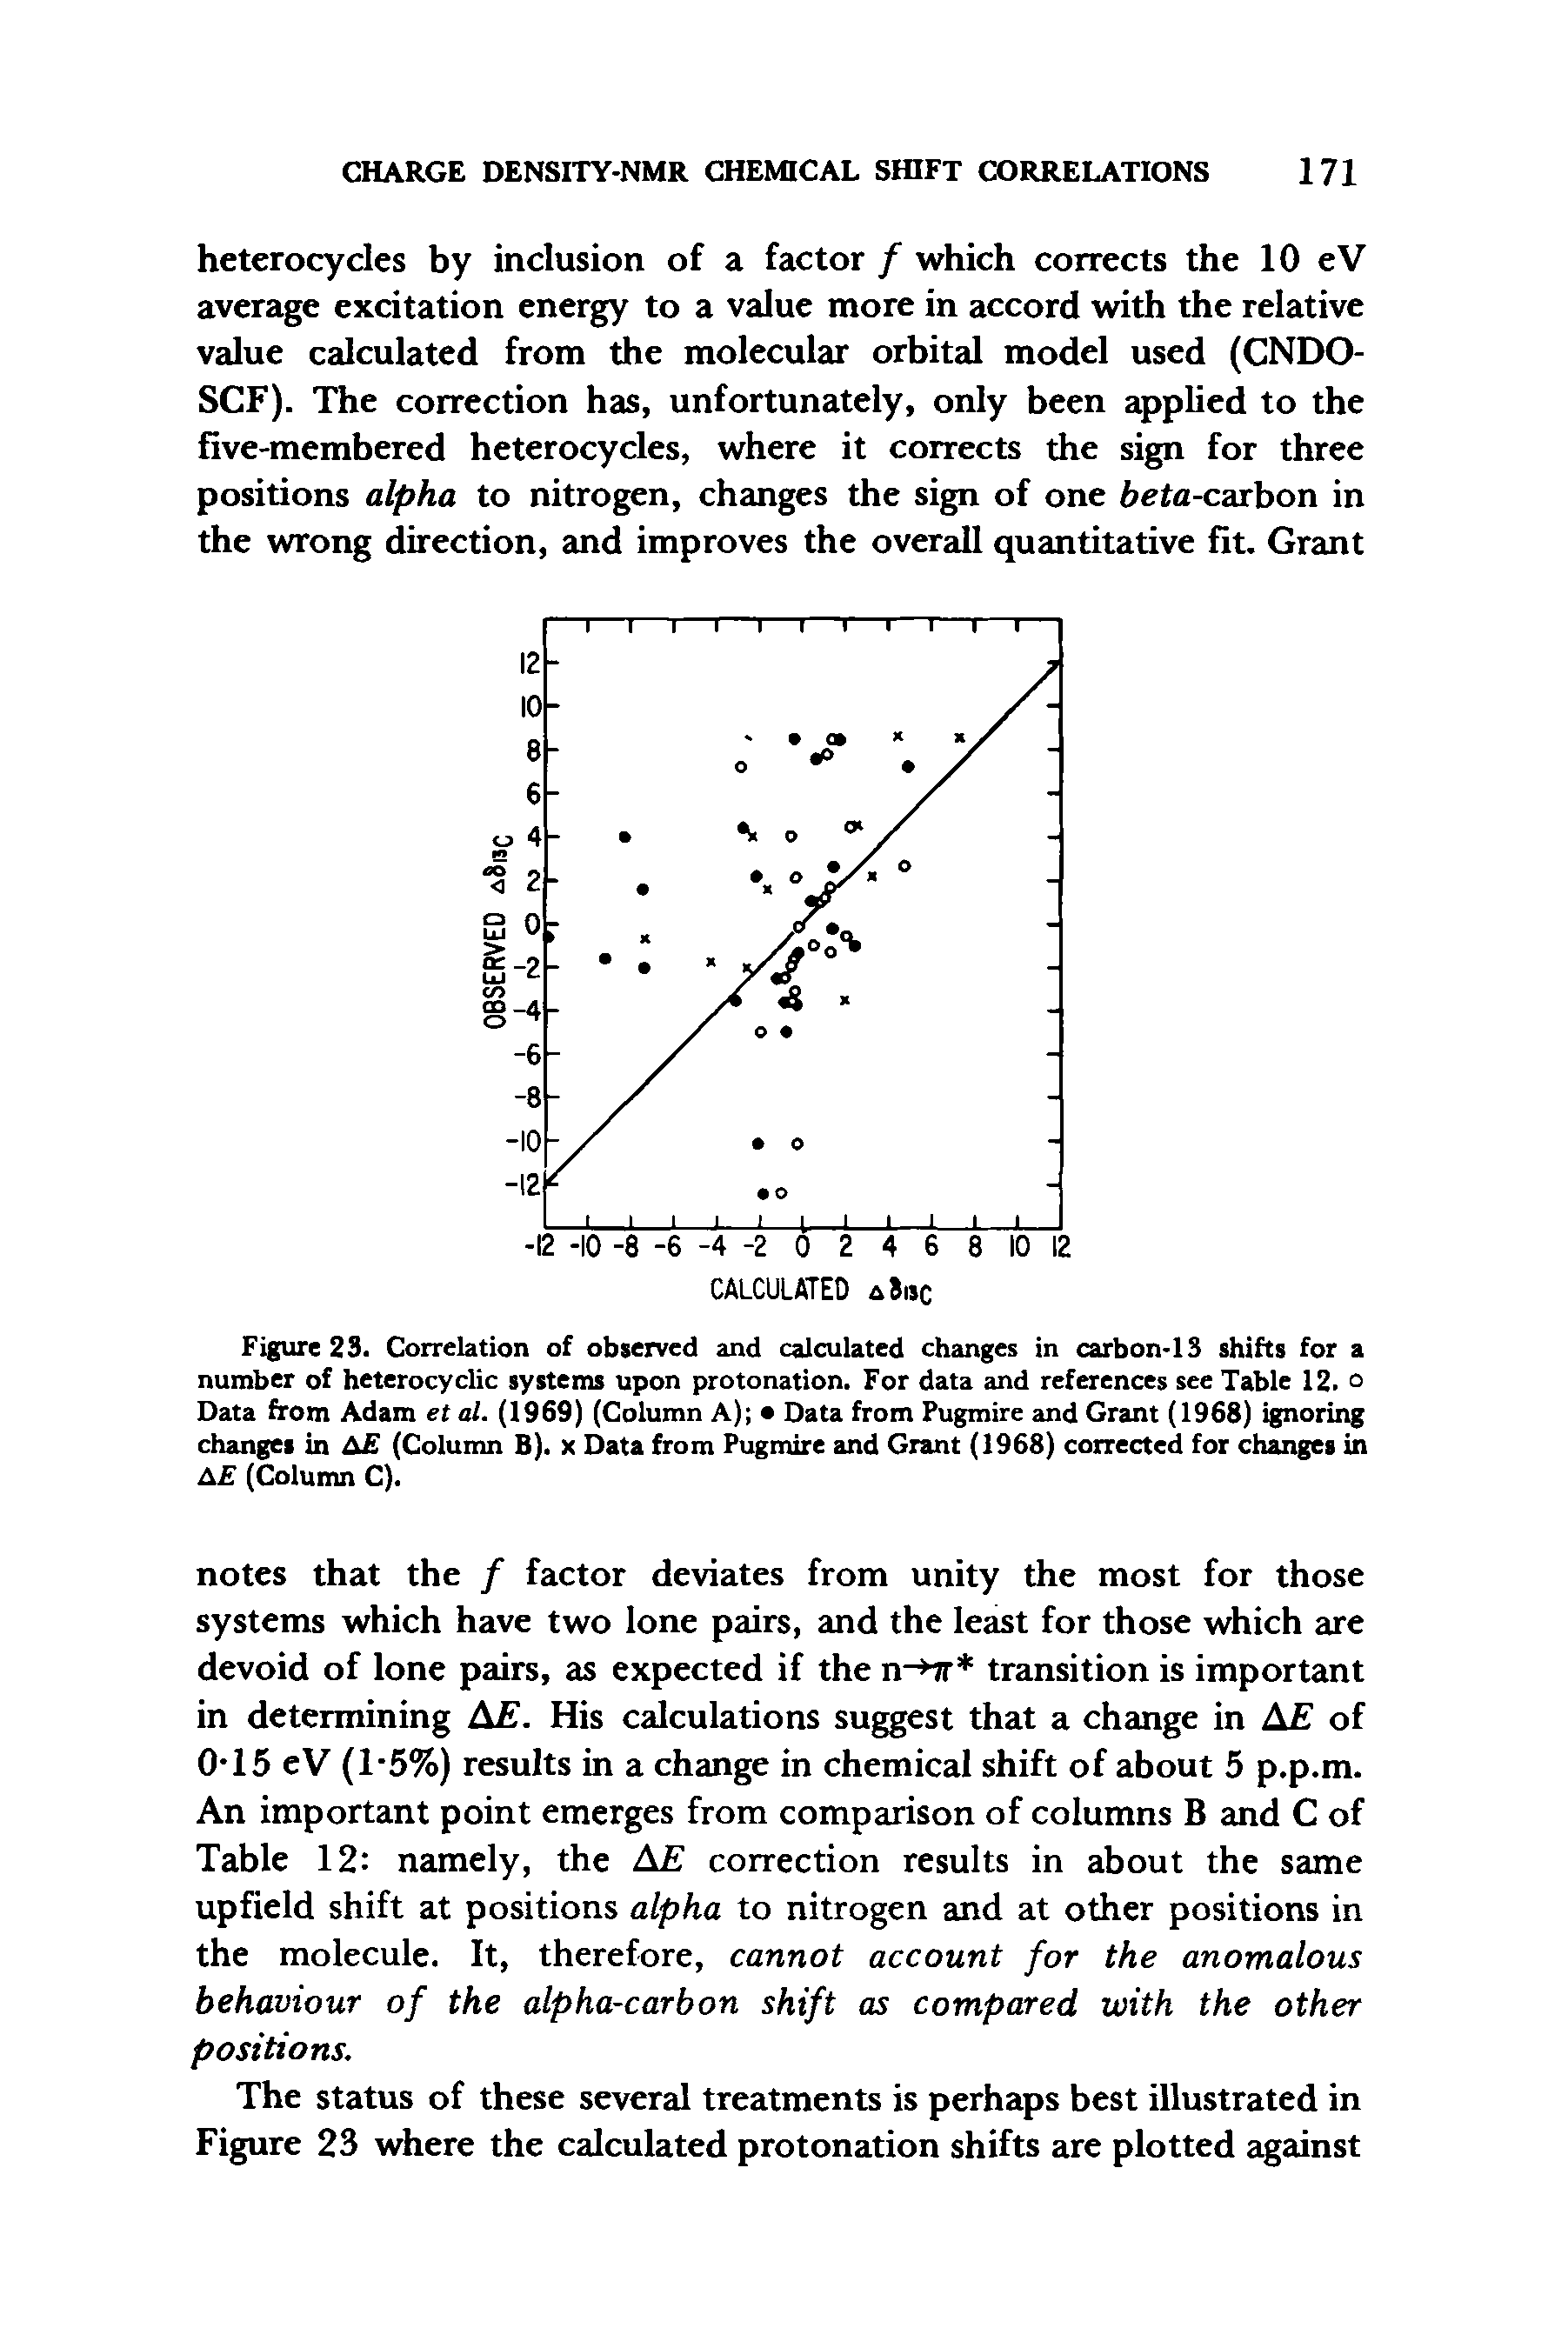 Figure 23. Correlation of observed and calculated changes in carbon-13 shifts for a number of heterocyclic systems upon protonation. For data and references see Table 12. ° Data from Adam et al. (1969) (Column A) Data from Pugmire and Grant (1968) ignoring changes in A (Column B). x Data from Pugmire and Grant (1968) corrected for changes in A (Column C).